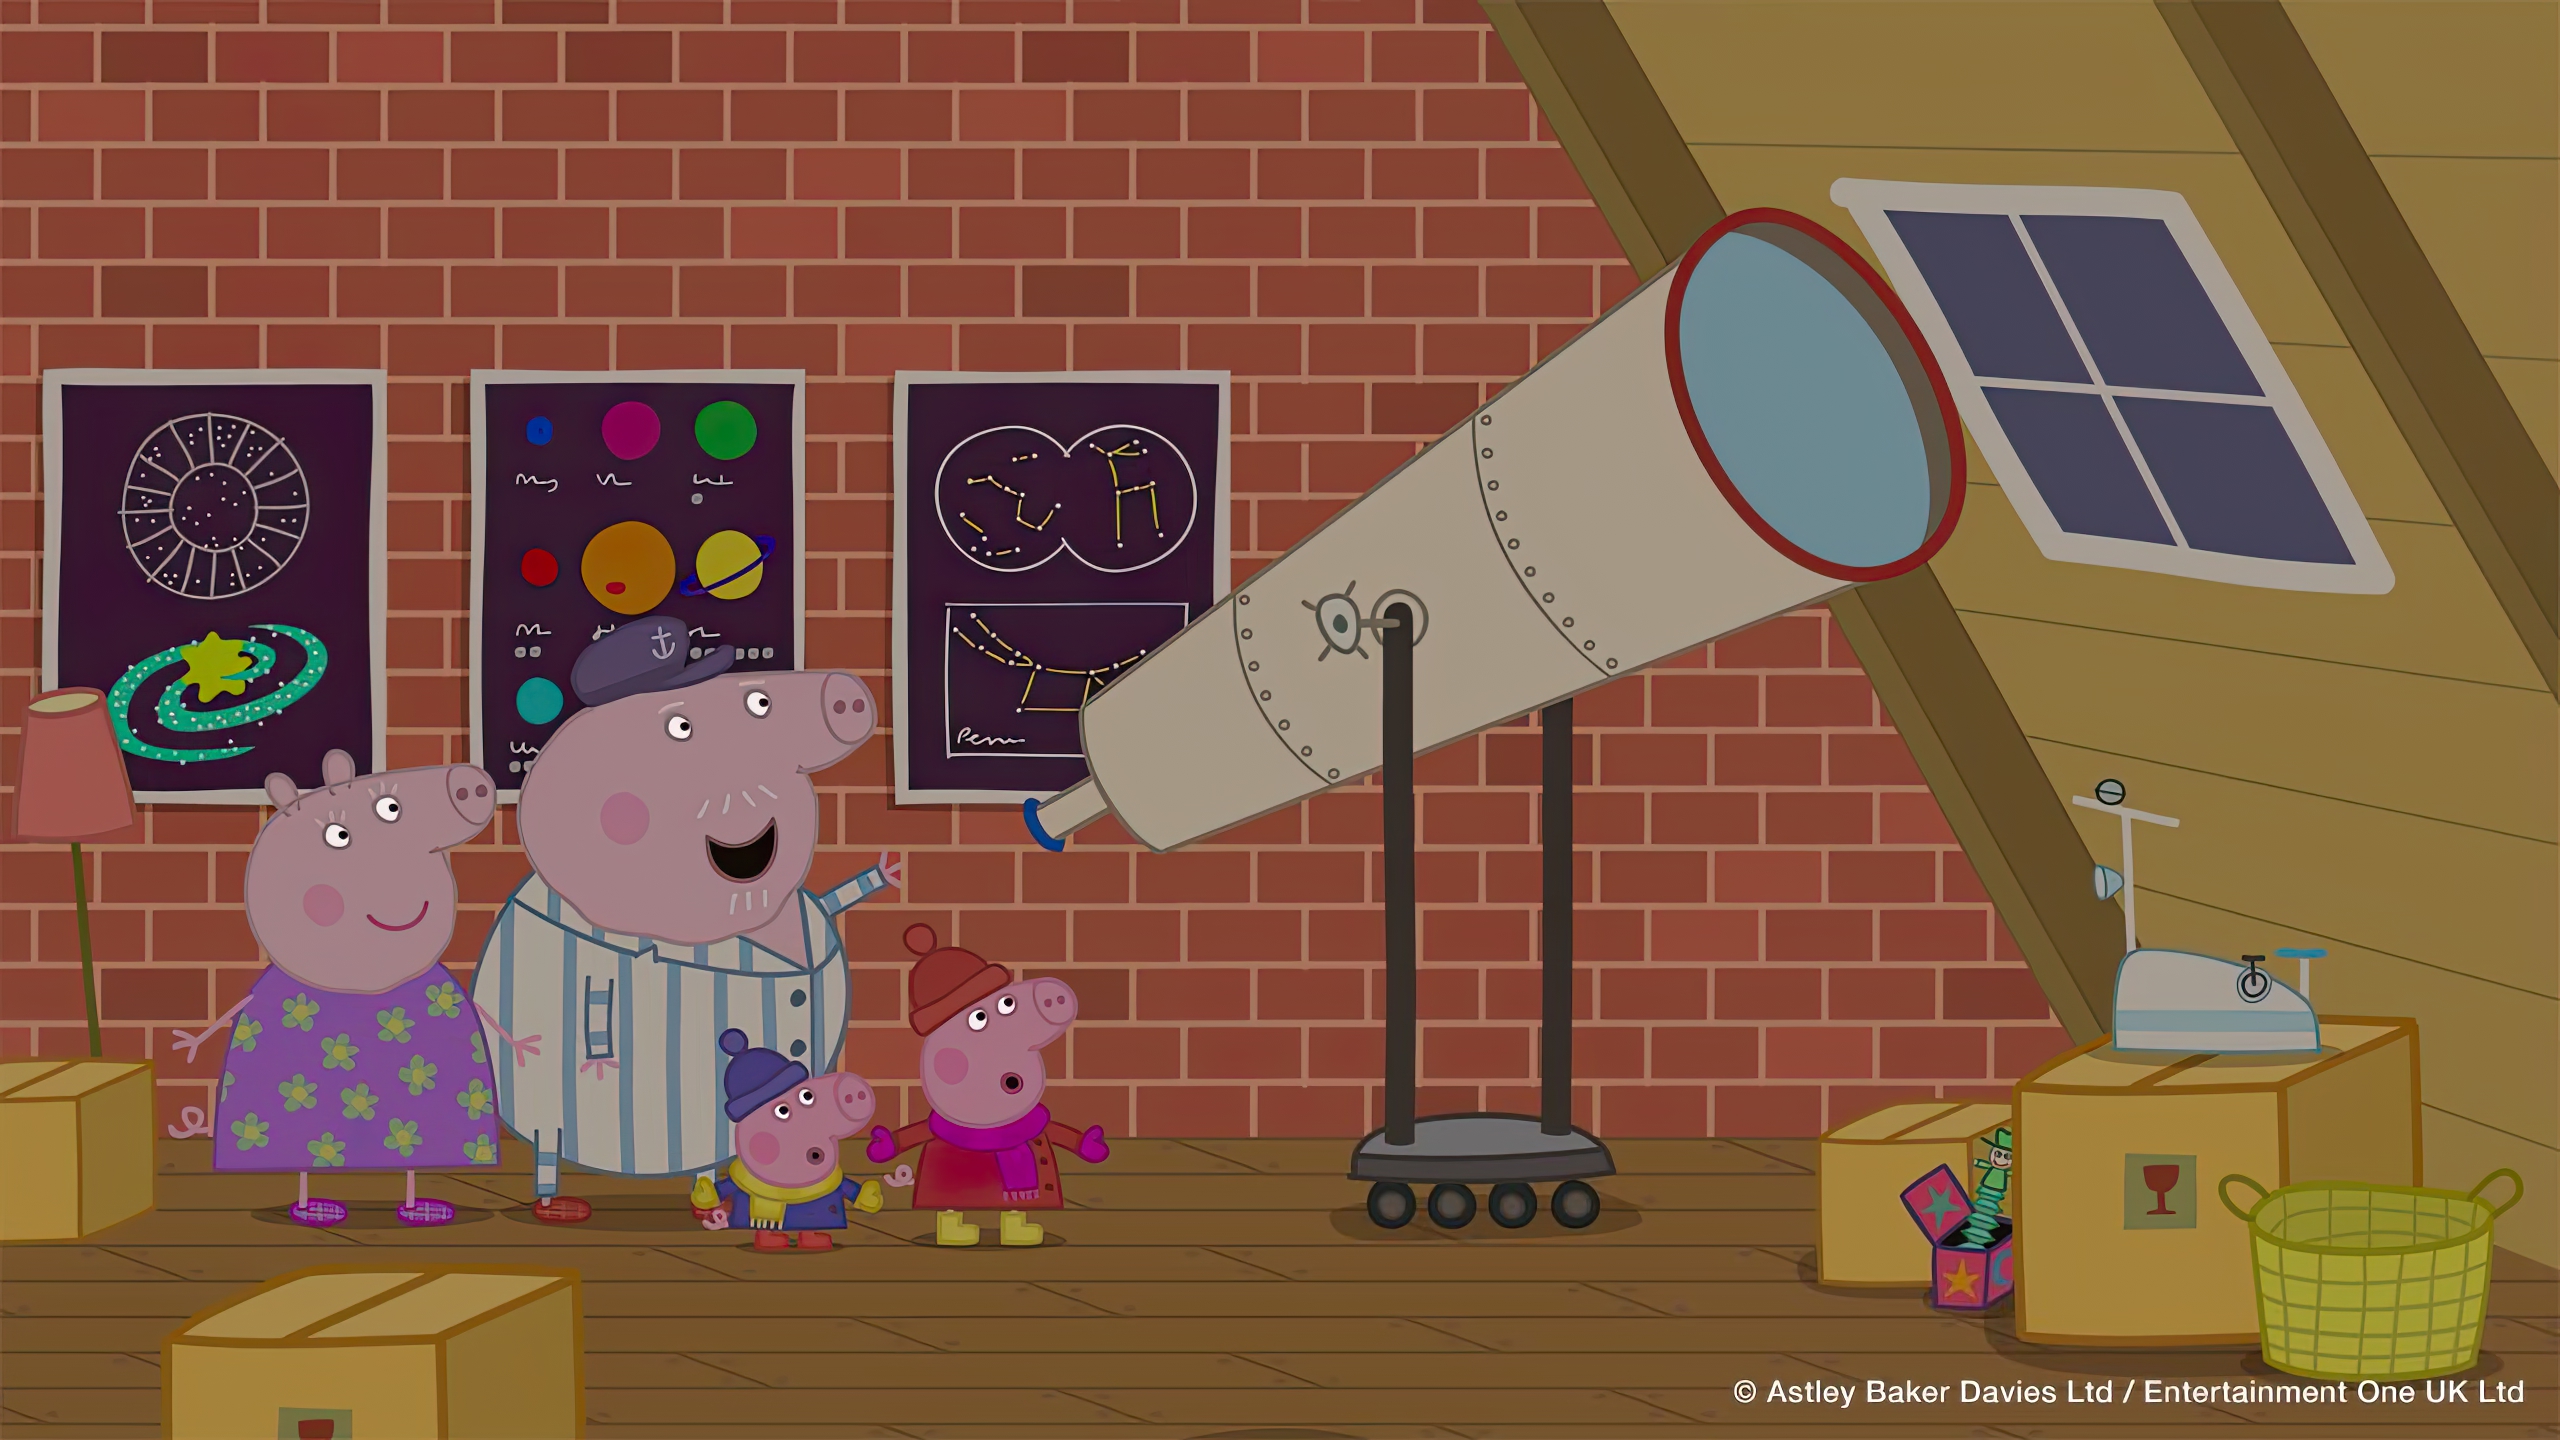 TV Show Peppa Pig HD Wallpaper | Background Image